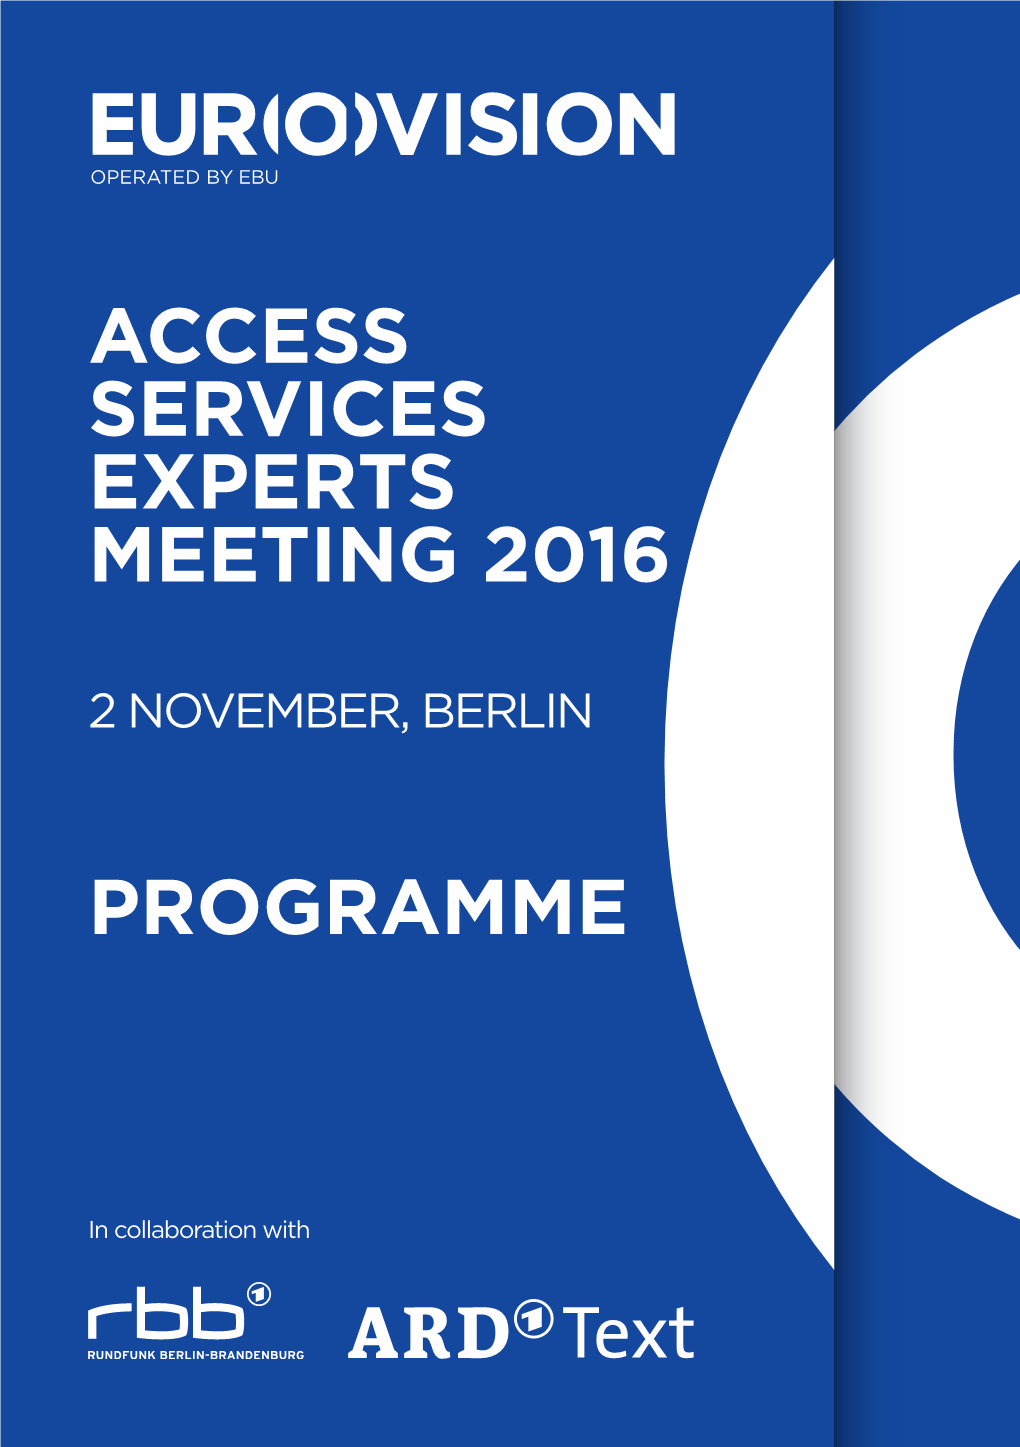 ACCESS SERVICES Experts MEETING 2016 PROGRAMME